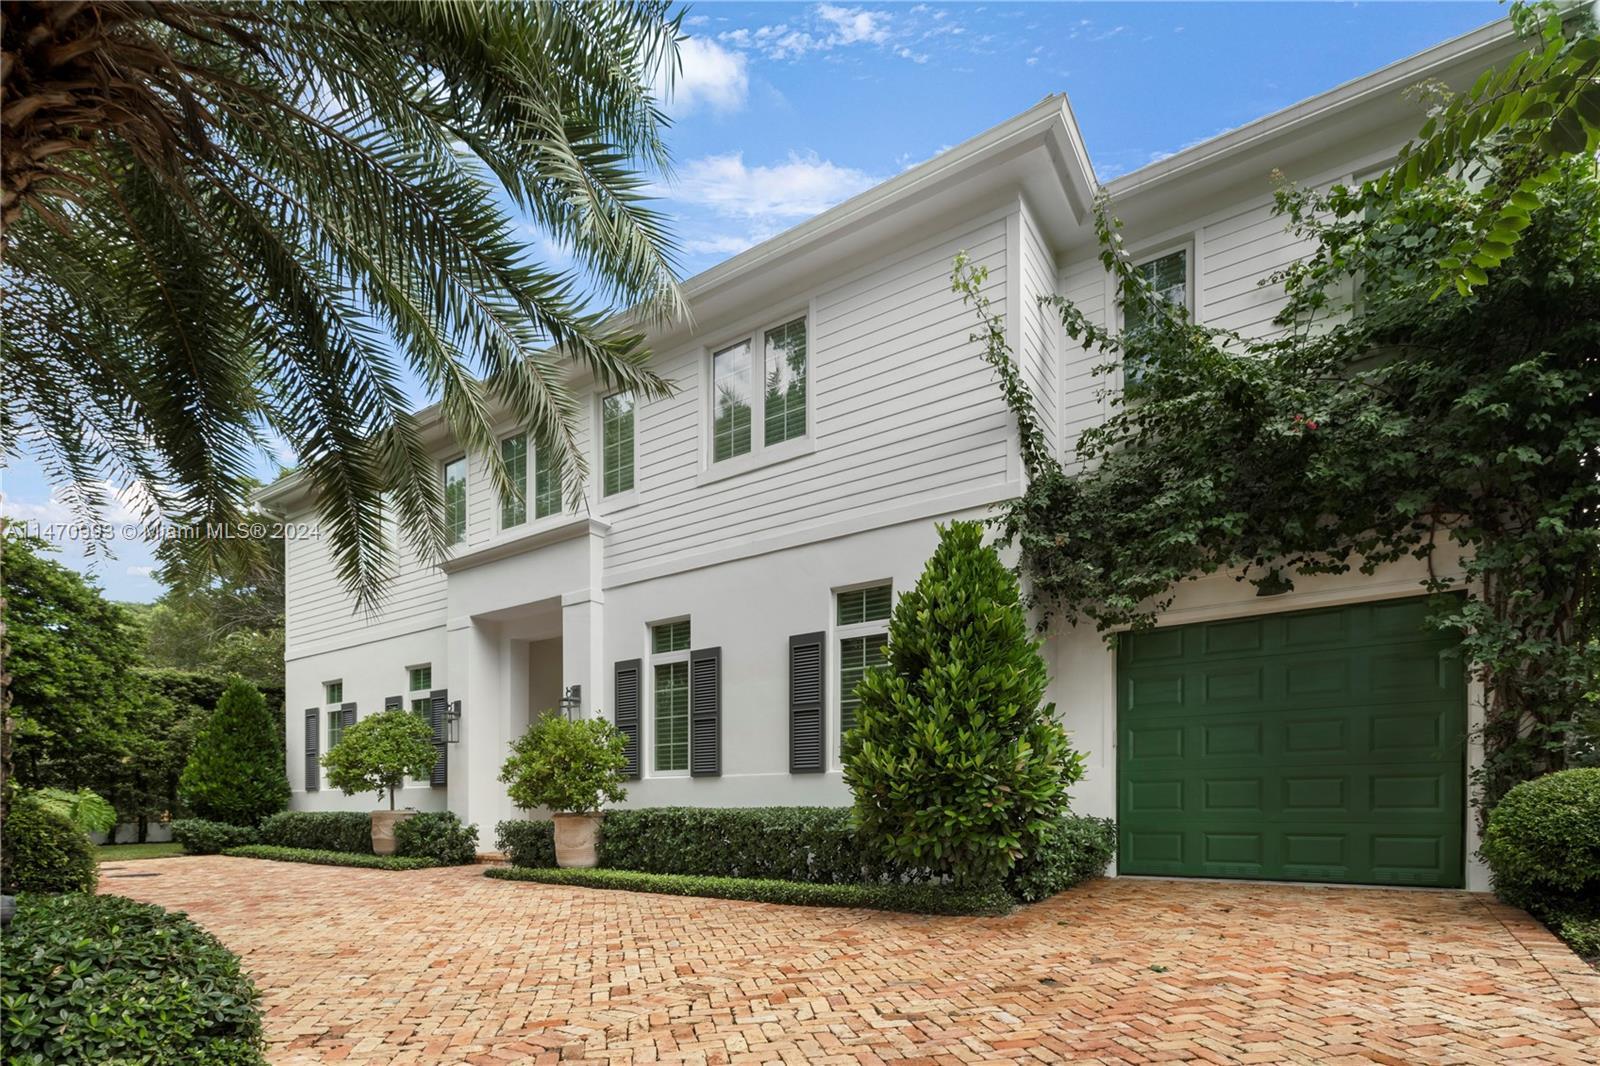 Photo of 402 Vittorio Ave in Coral Gables, FL